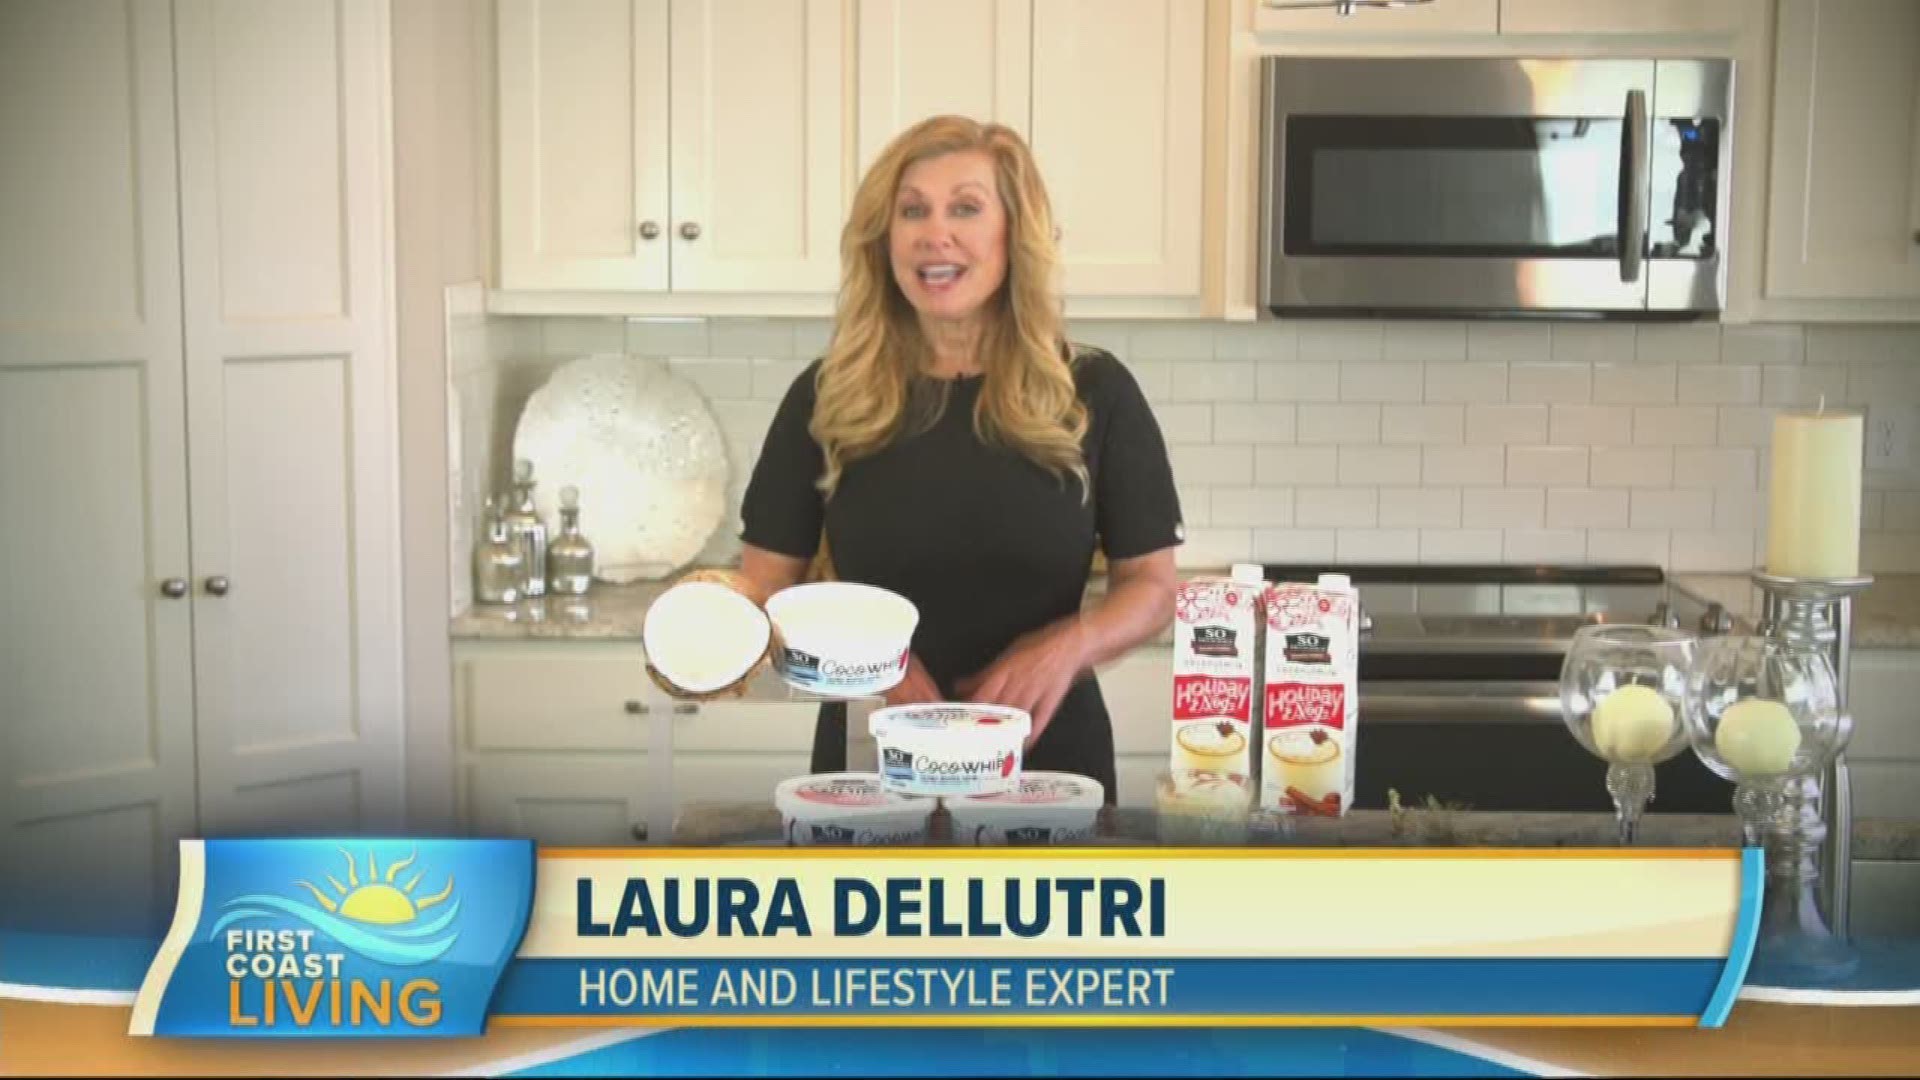 Laura Dellutri is a home and lifestyle expert. She offers up a few delicious recipes that you can whip up this holiday season.